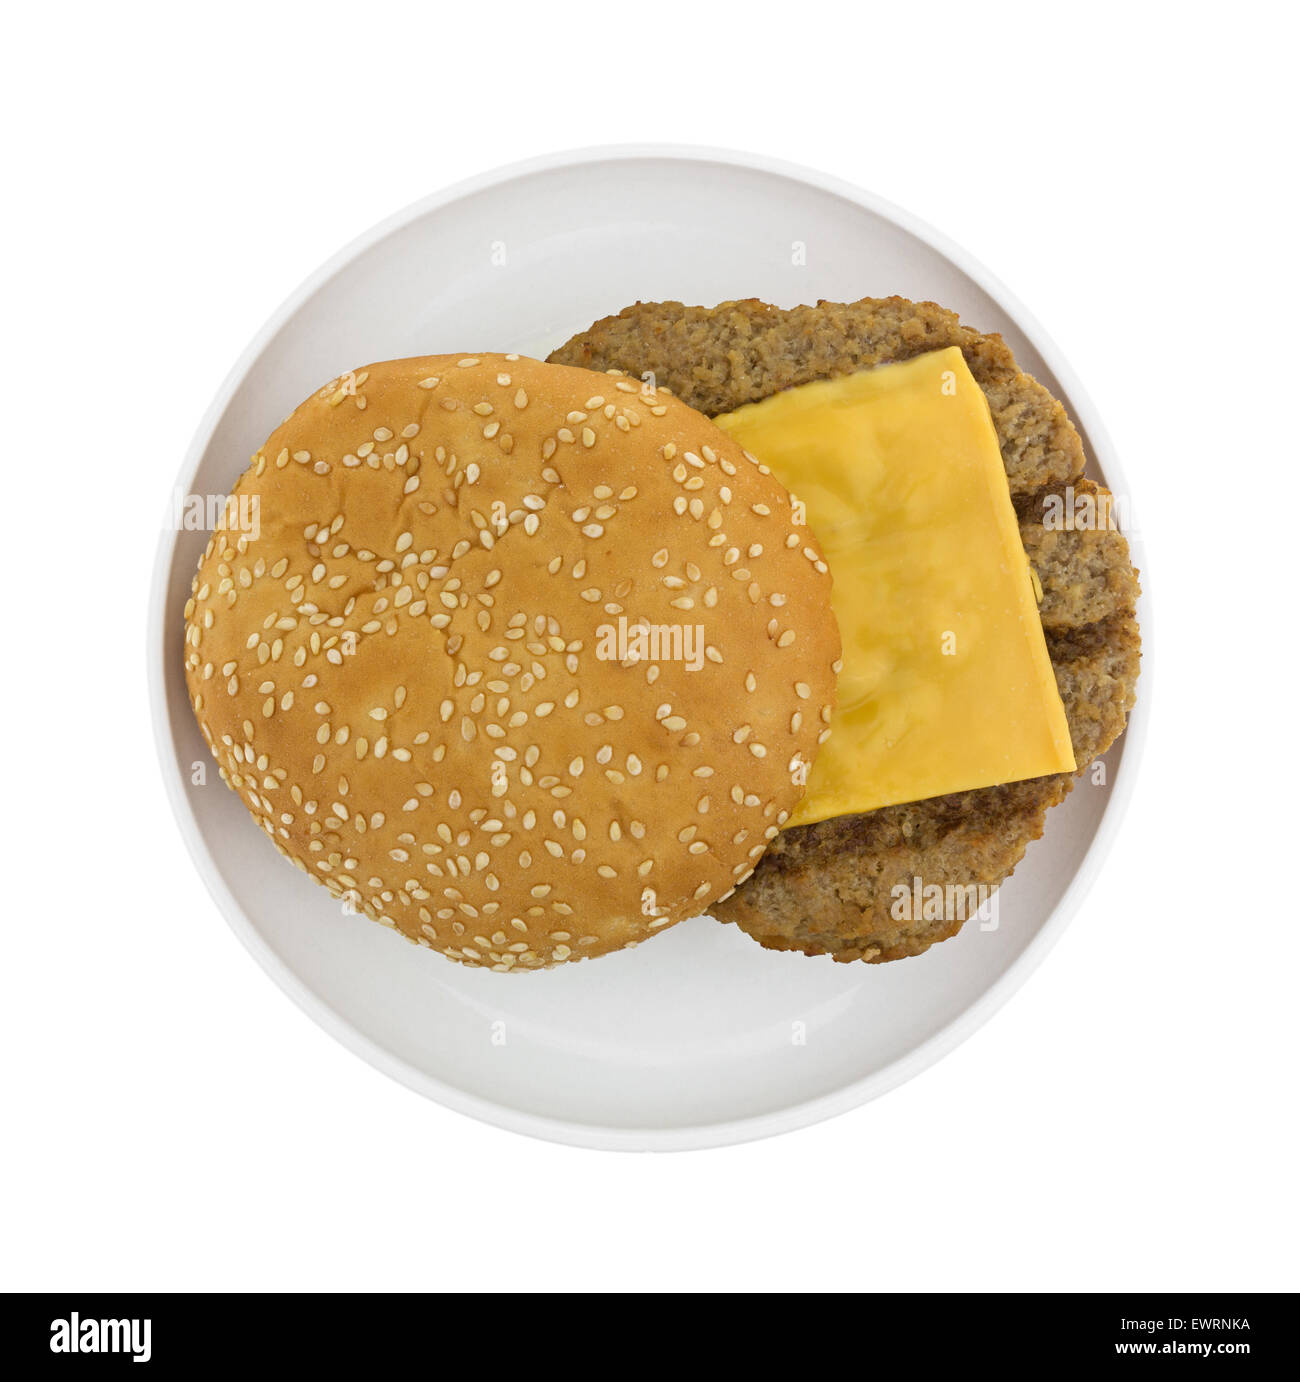 Top view of a microwaved cheeseburger with sesame seed bun on a small plate atop a white background. Stock Photo